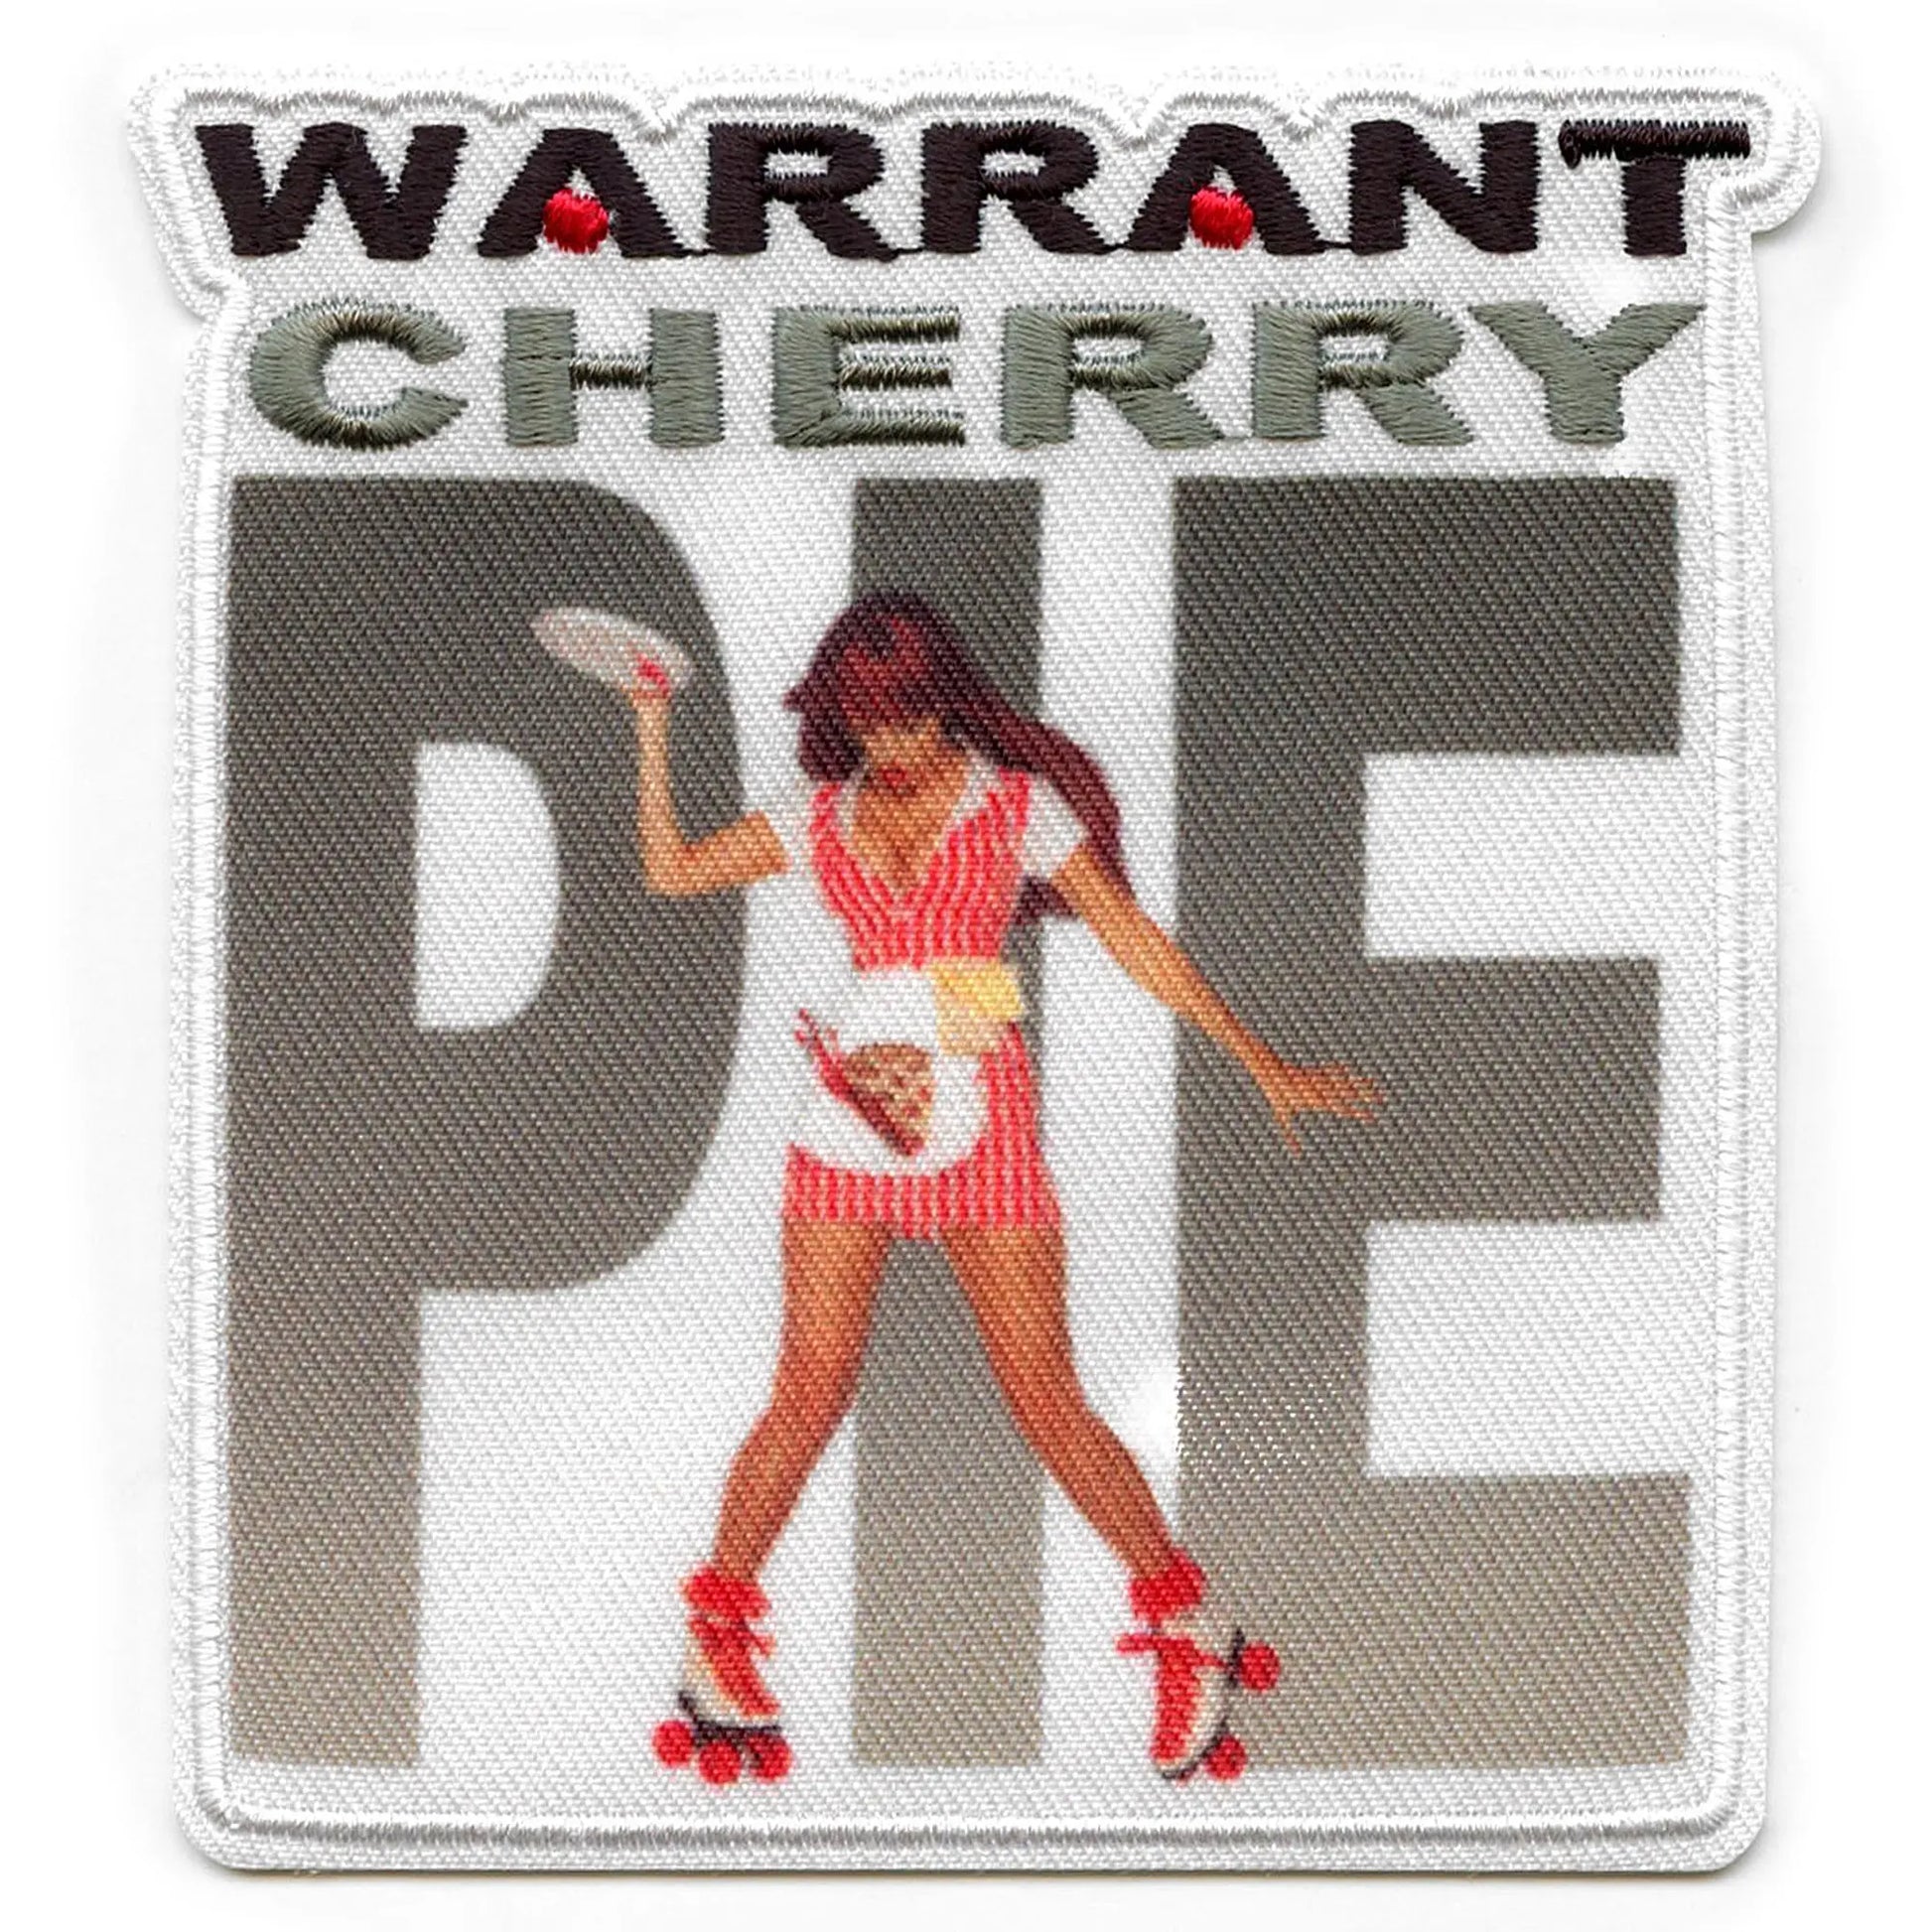 Warrant Cherry Pie Patch California 90's Rock Embroidered Iron On